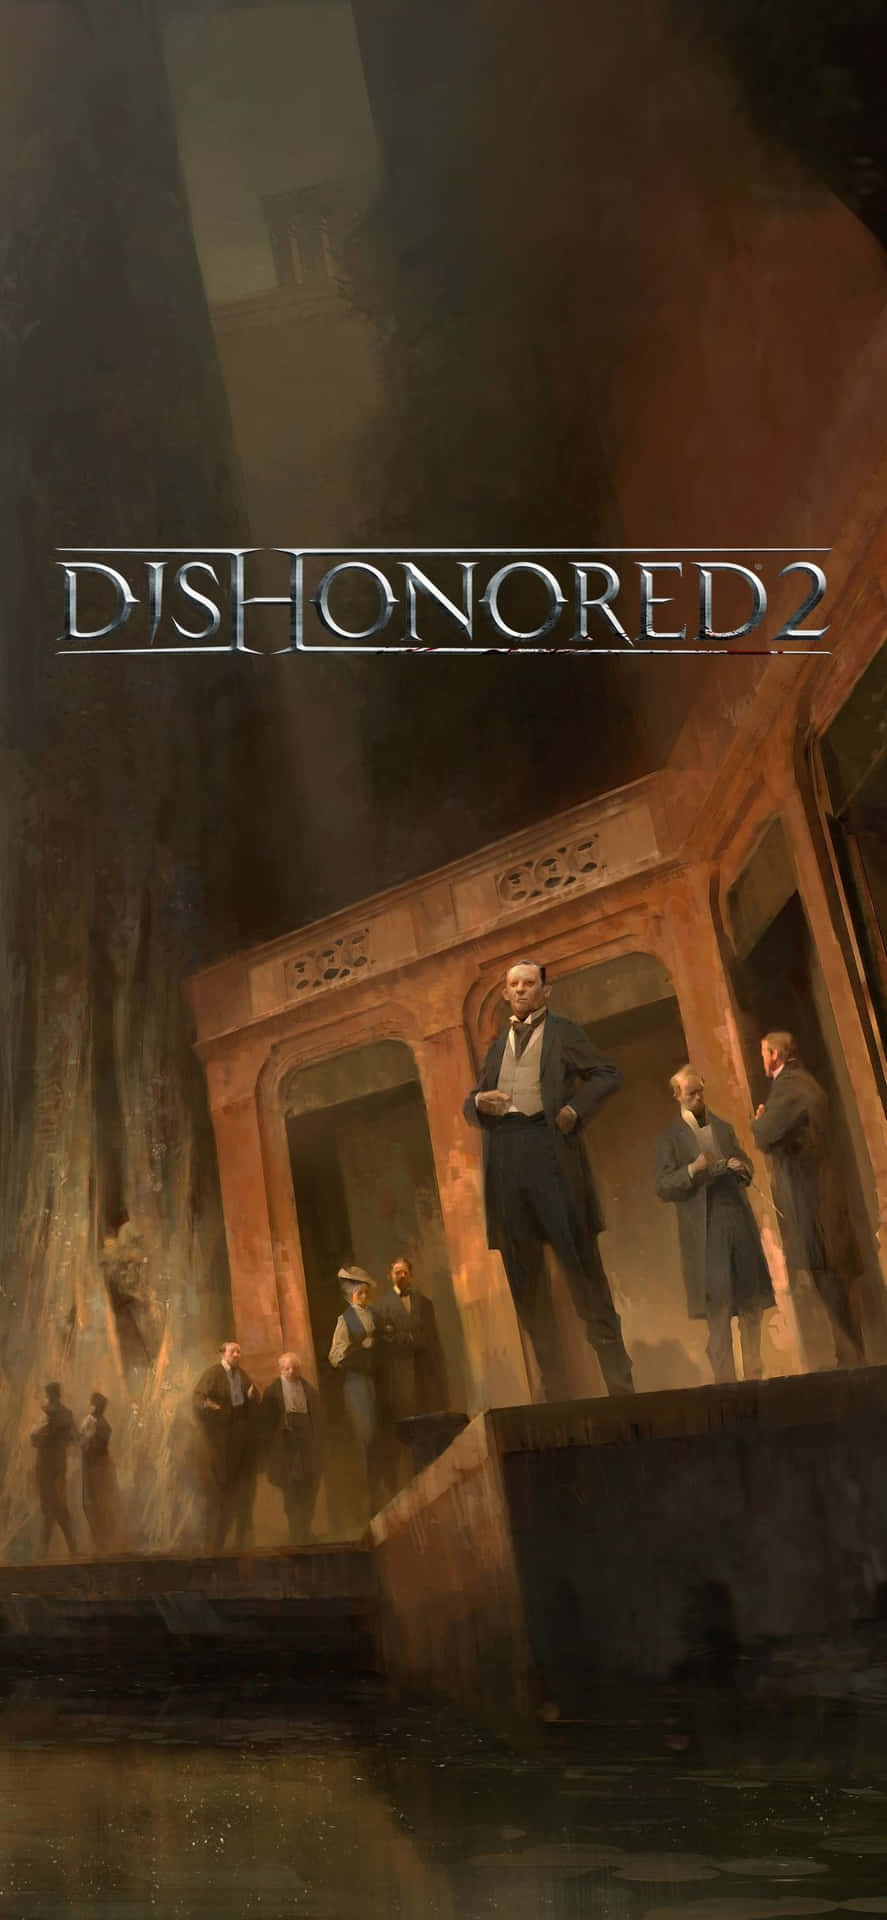 An immersive, next-level gaming experience with Dishonored 2 on Iphone X